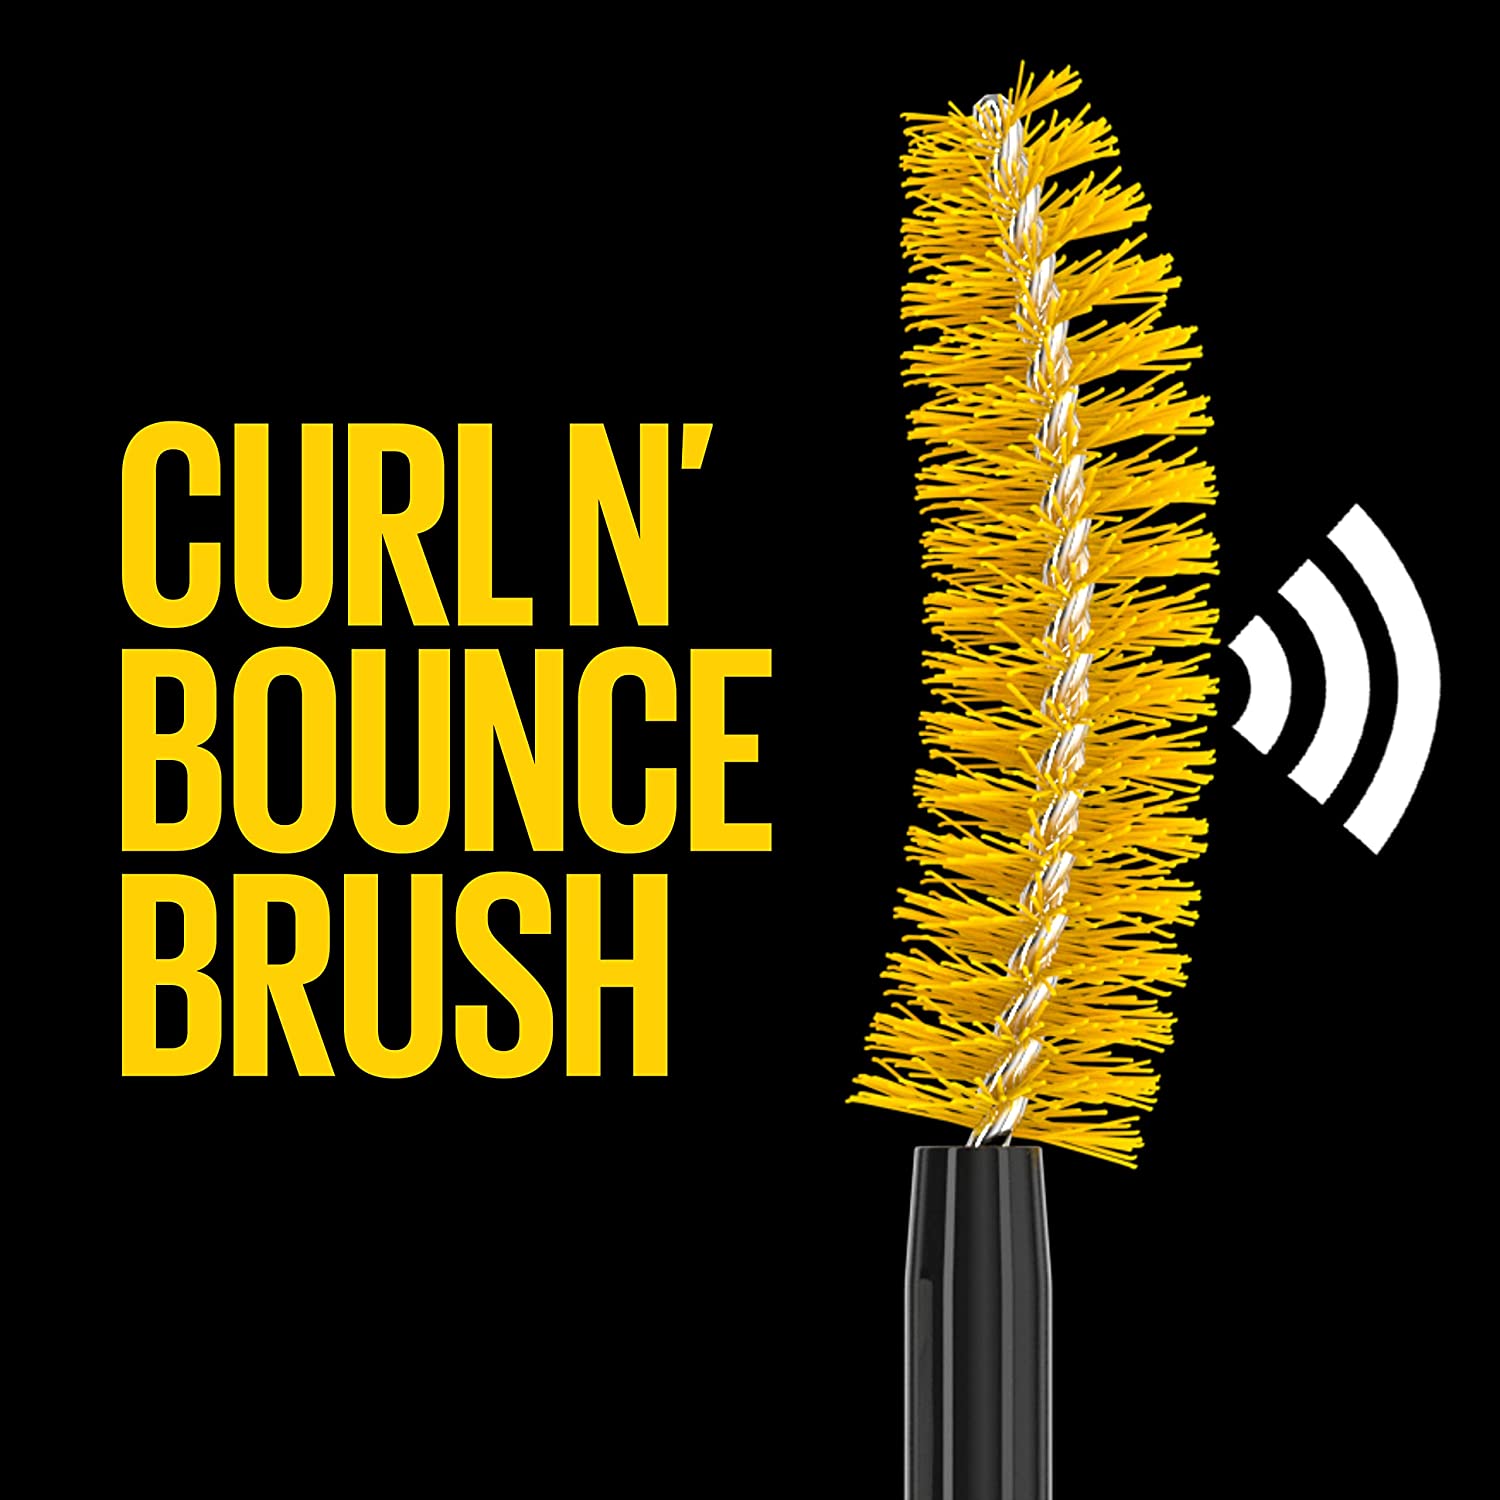 Maybelline Colossal Curl Bounce Mascara - Colossal Curl Bounce Maybelline 